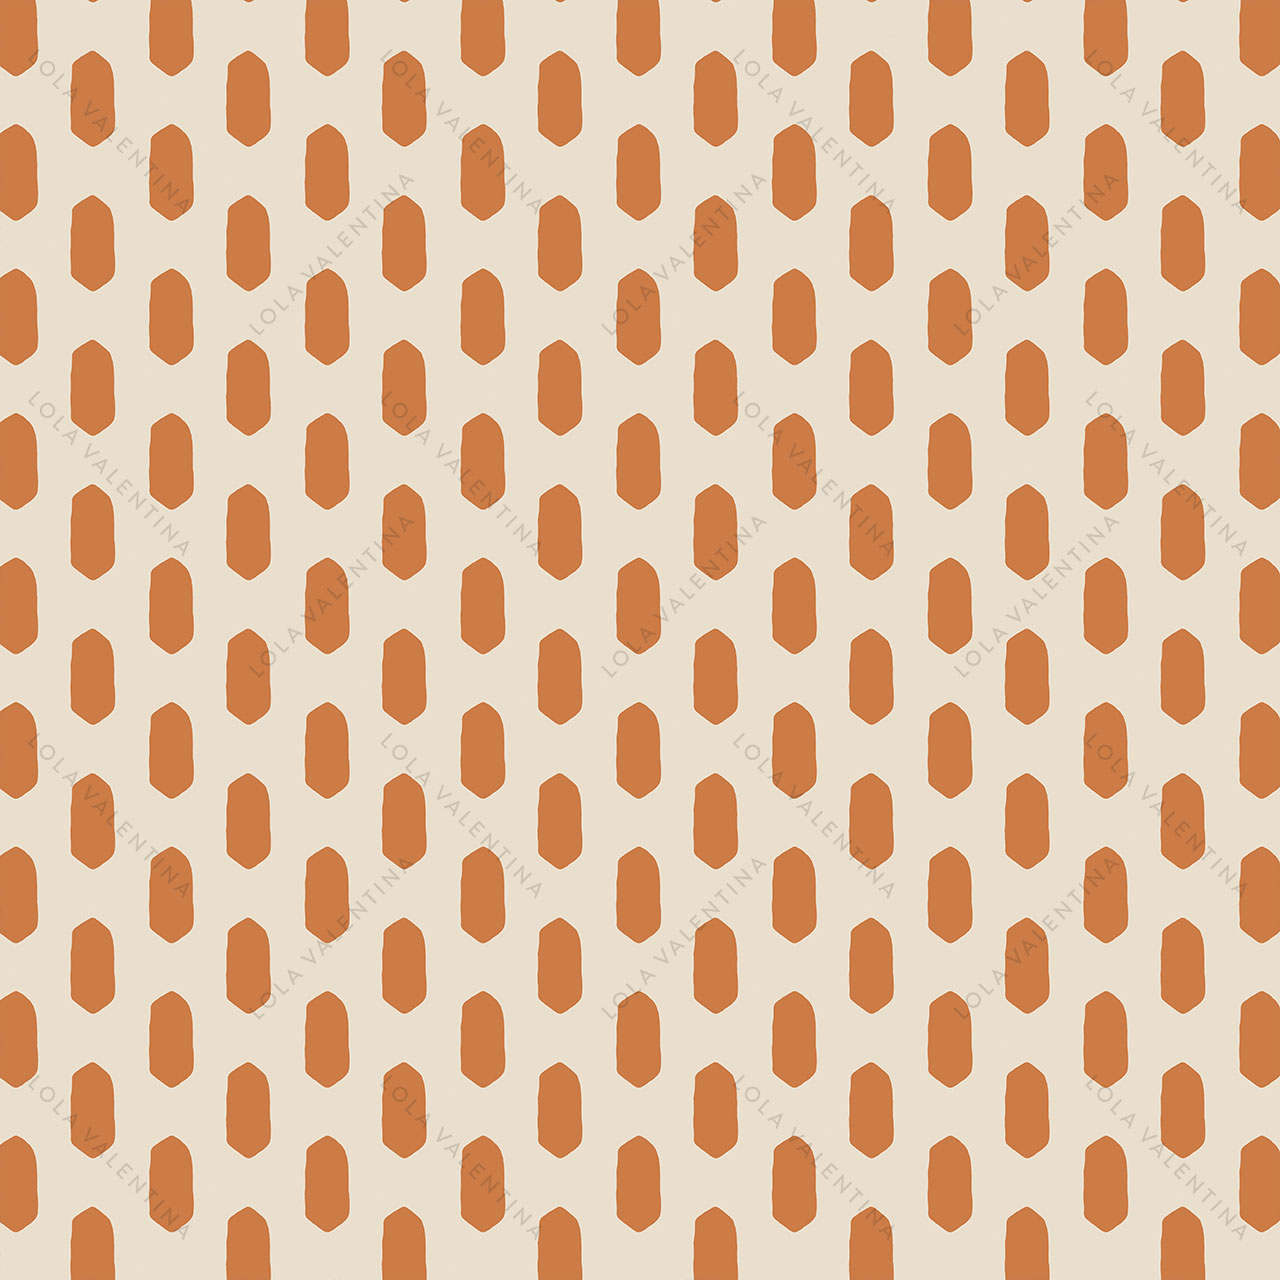 Orange-Ivory-Abstract-Oval-Shapes-Pattern